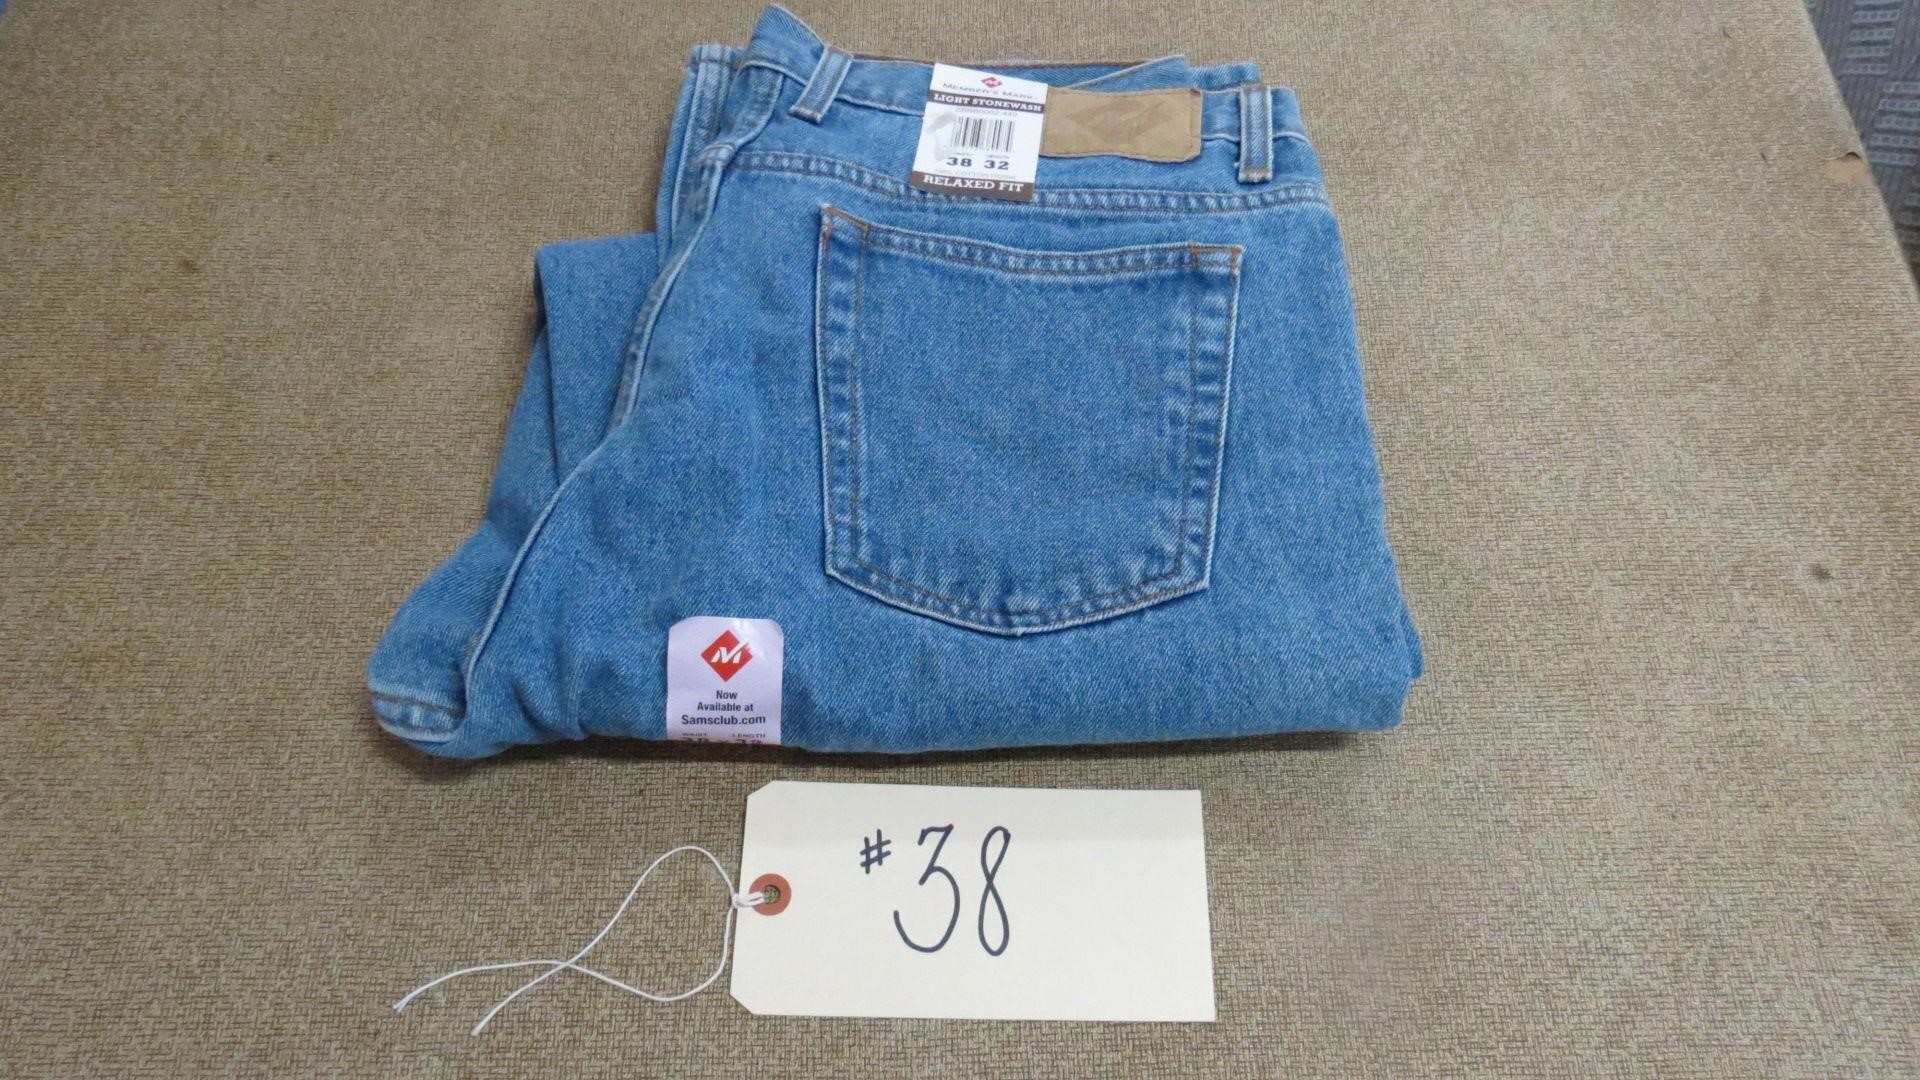 NEW W/ TAGS RELAXED FIT JEANS 38" X 32"